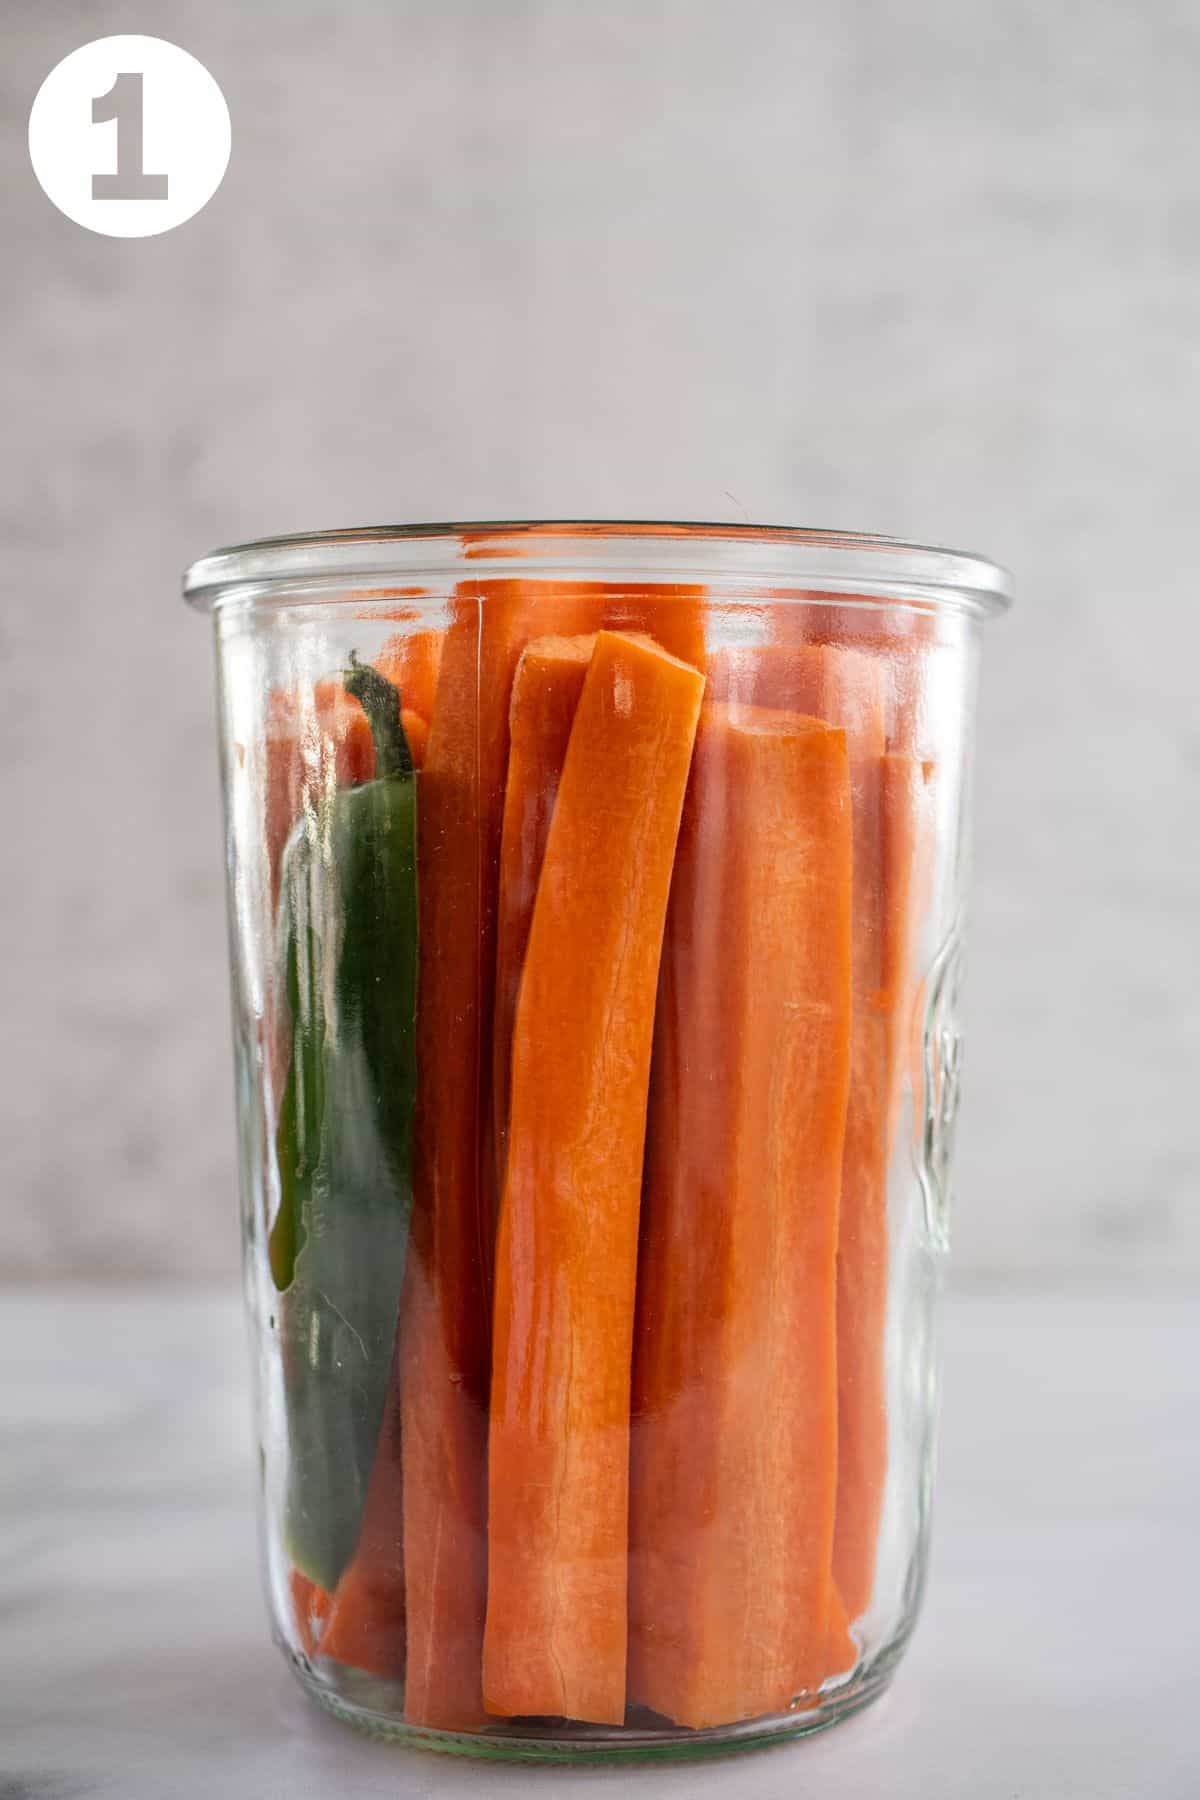 Carrot sticks in a glass jar. Labeled with a "1" in the upper left corner.